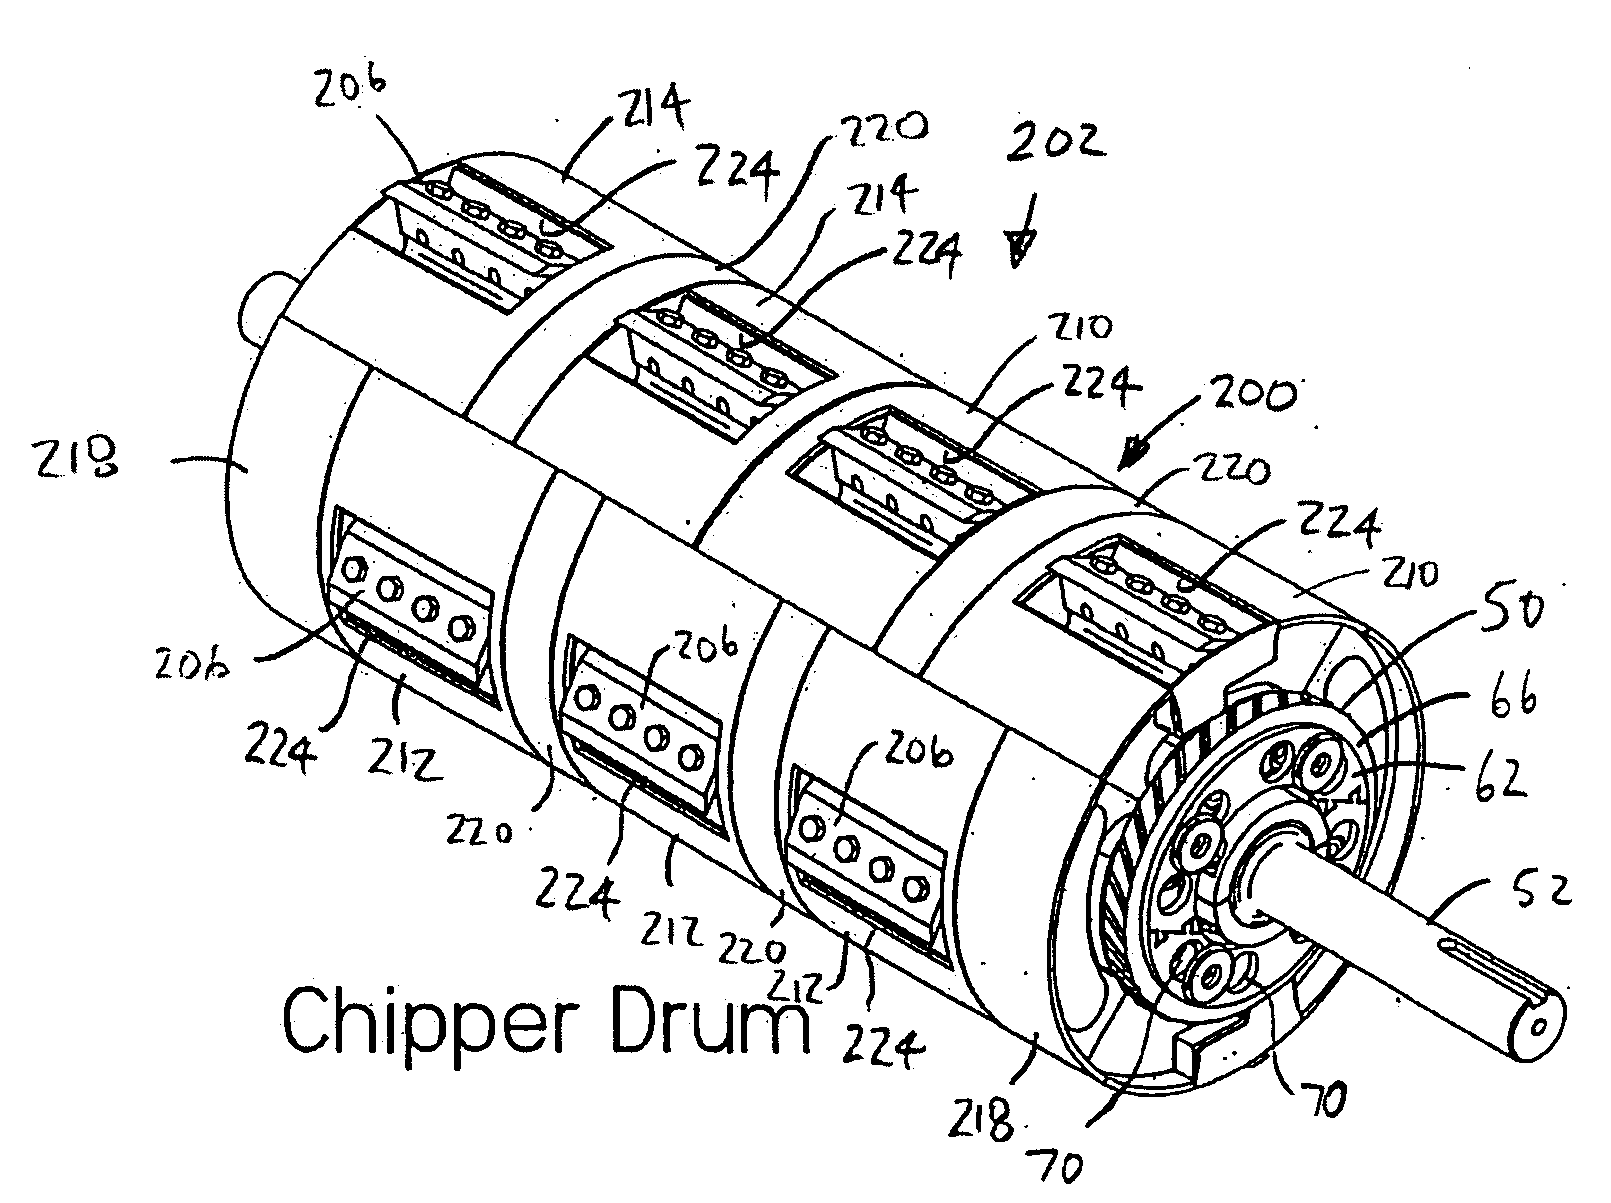 Interchangable chipper inserts for wood grinder